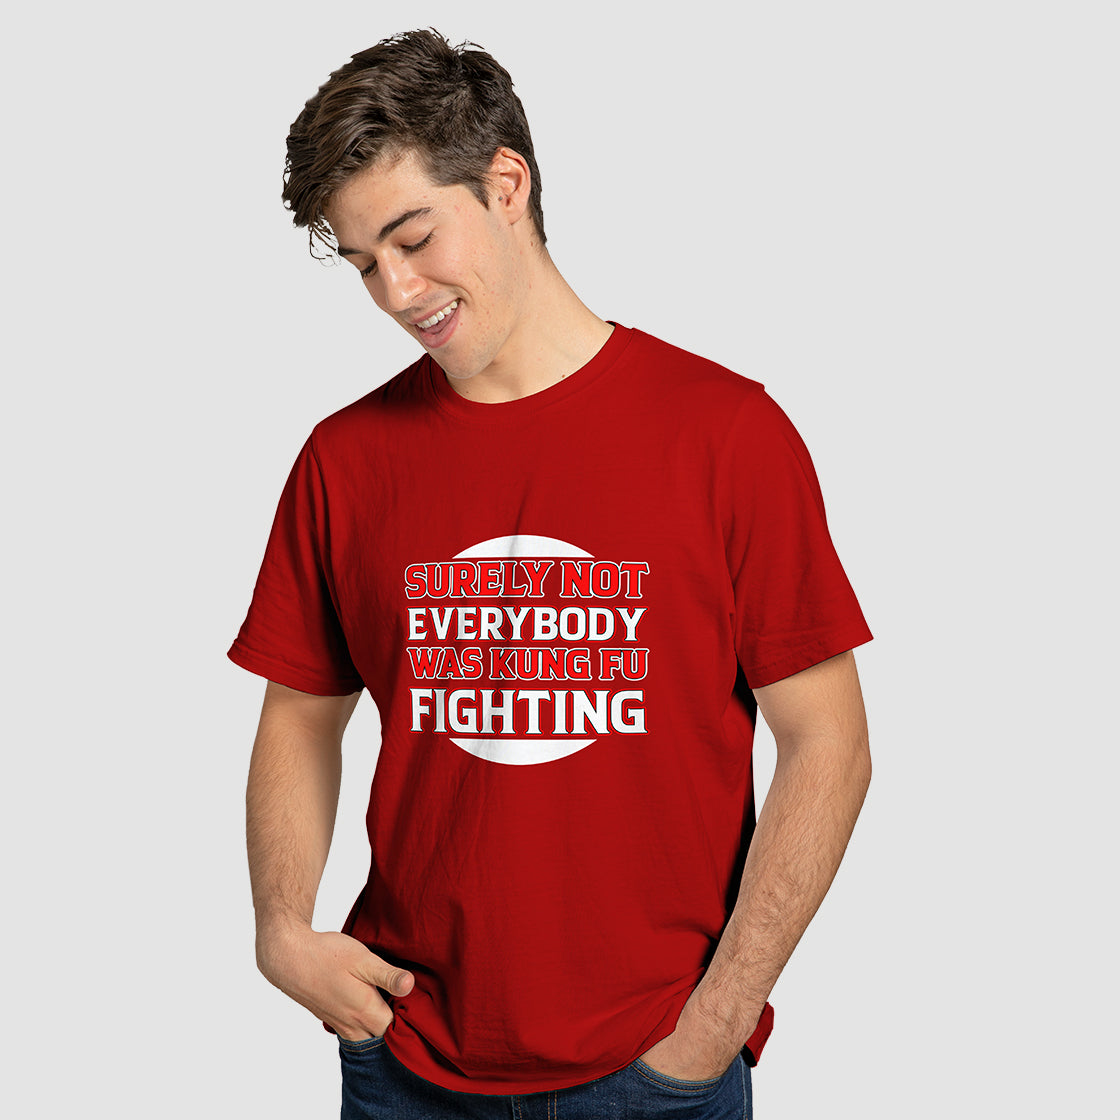 "Surely Not Everybody Was Kung Fu Fighting" T-Shirt